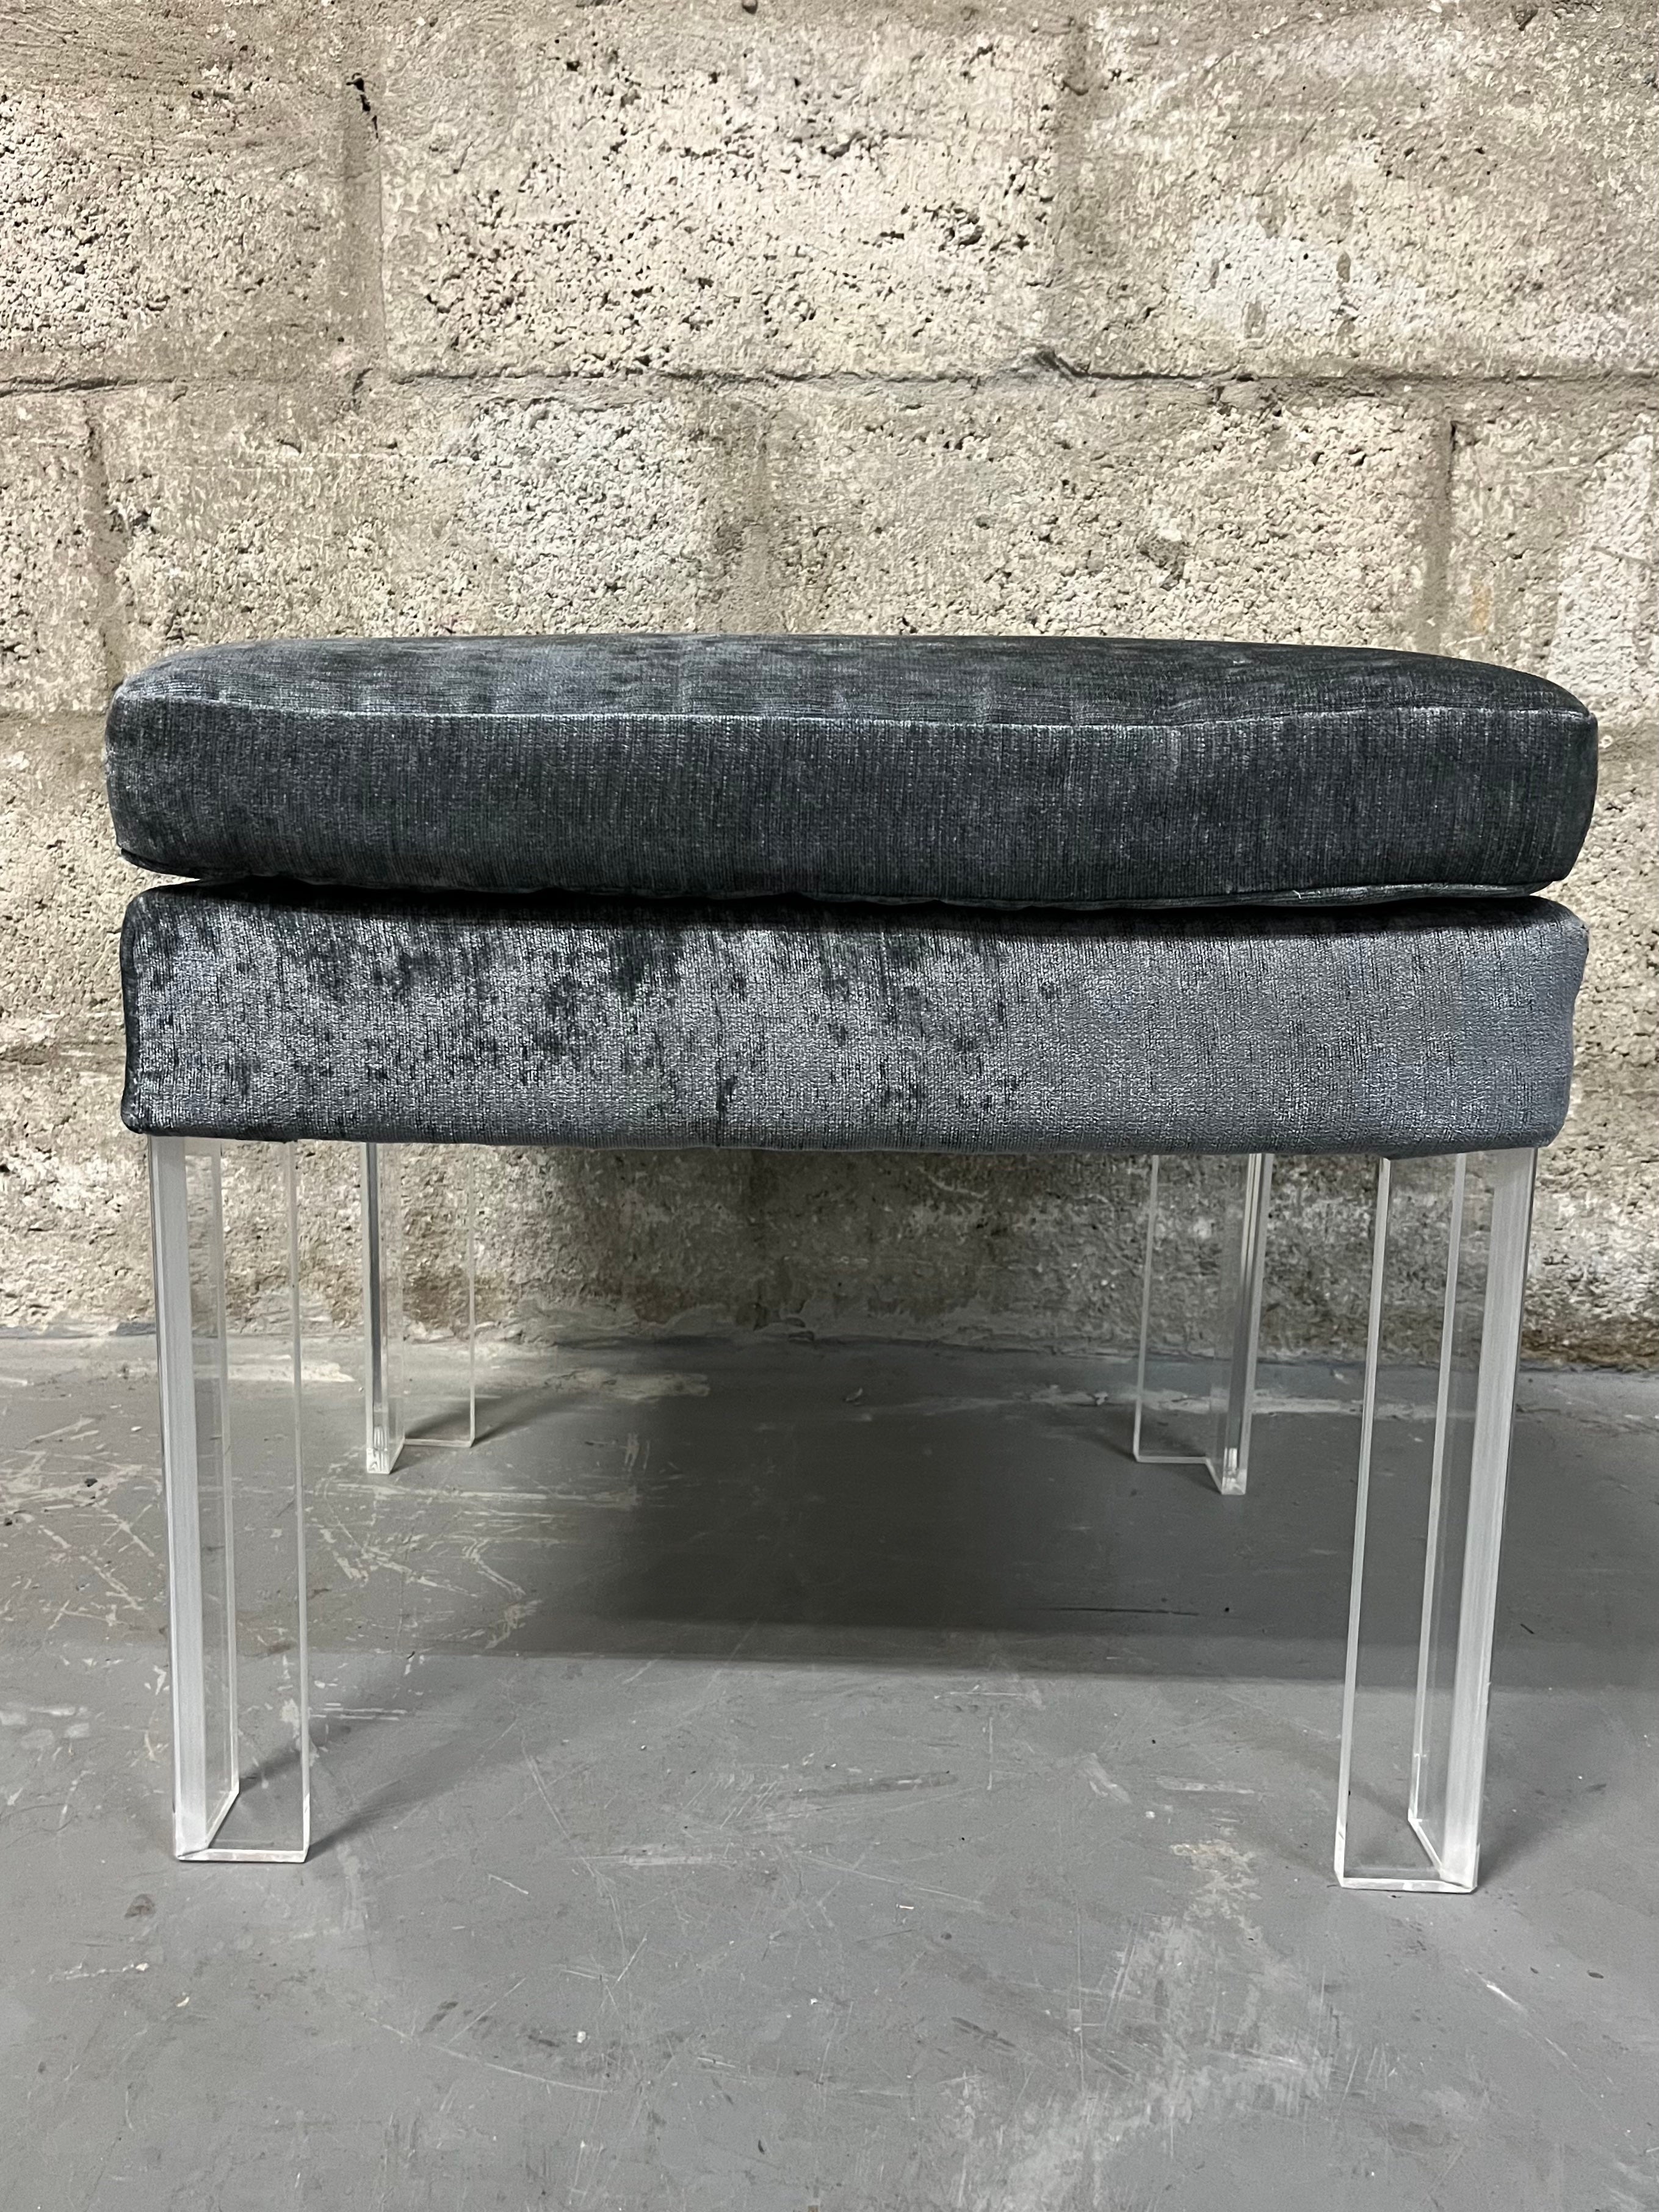 Vintage Hollywood Regency Upholstered Lucite Bench in the Karl Springer Style. Circa 1980s
Features angle shaped lucite legs and a newly reupholstered cushion in gray velvety like upholstery. 
In excellent condition with minor signs of wear and age.